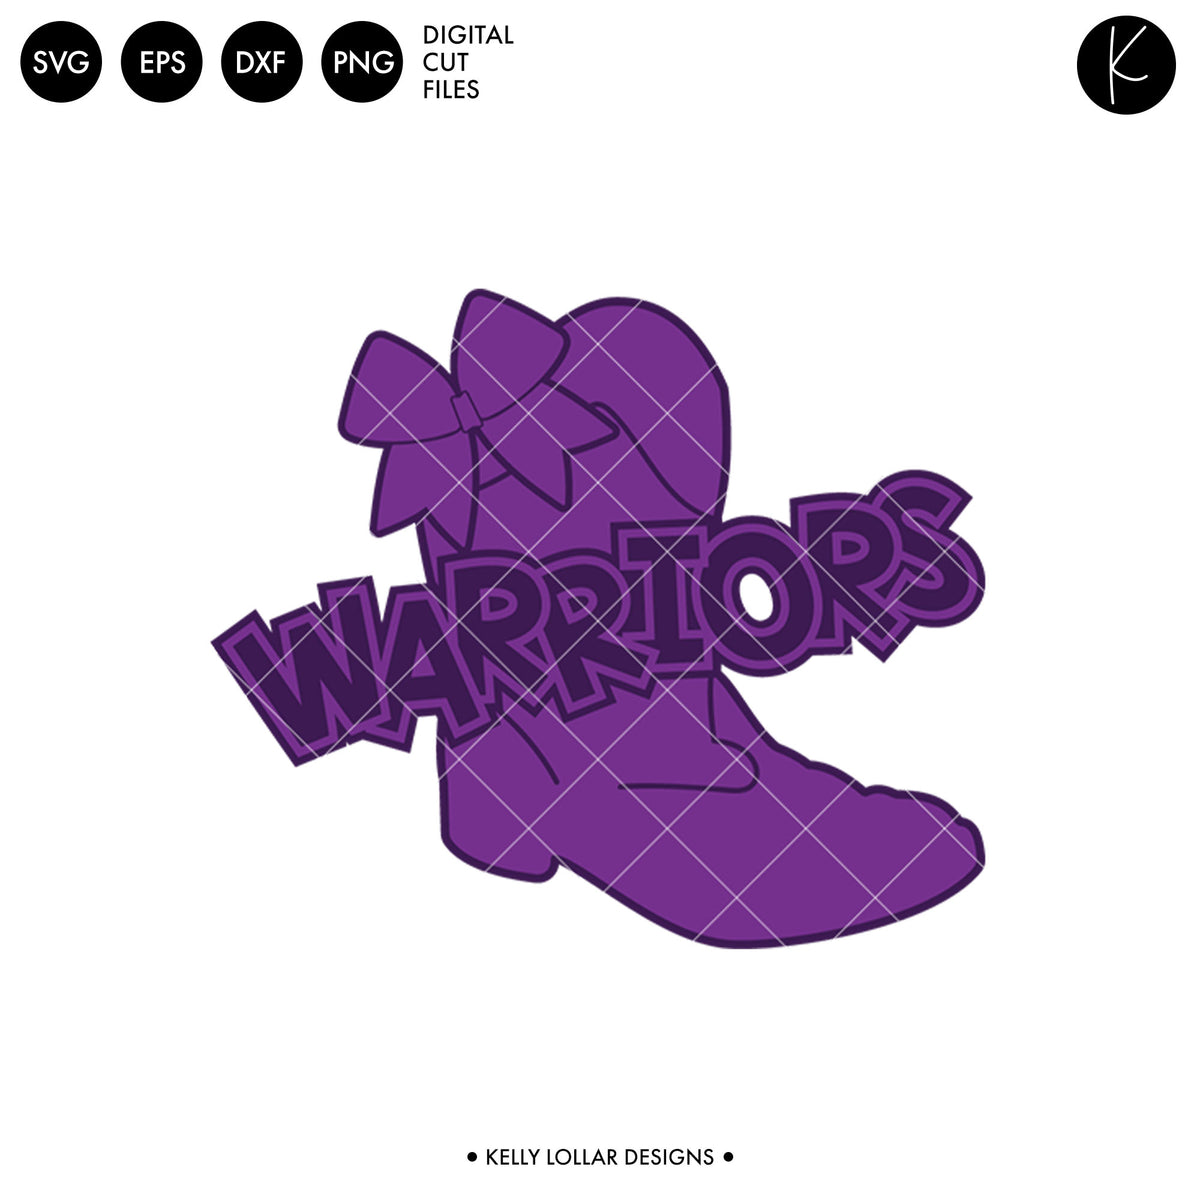 Warriors Drill Bundle | SVG DXF EPS PNG Cut Files